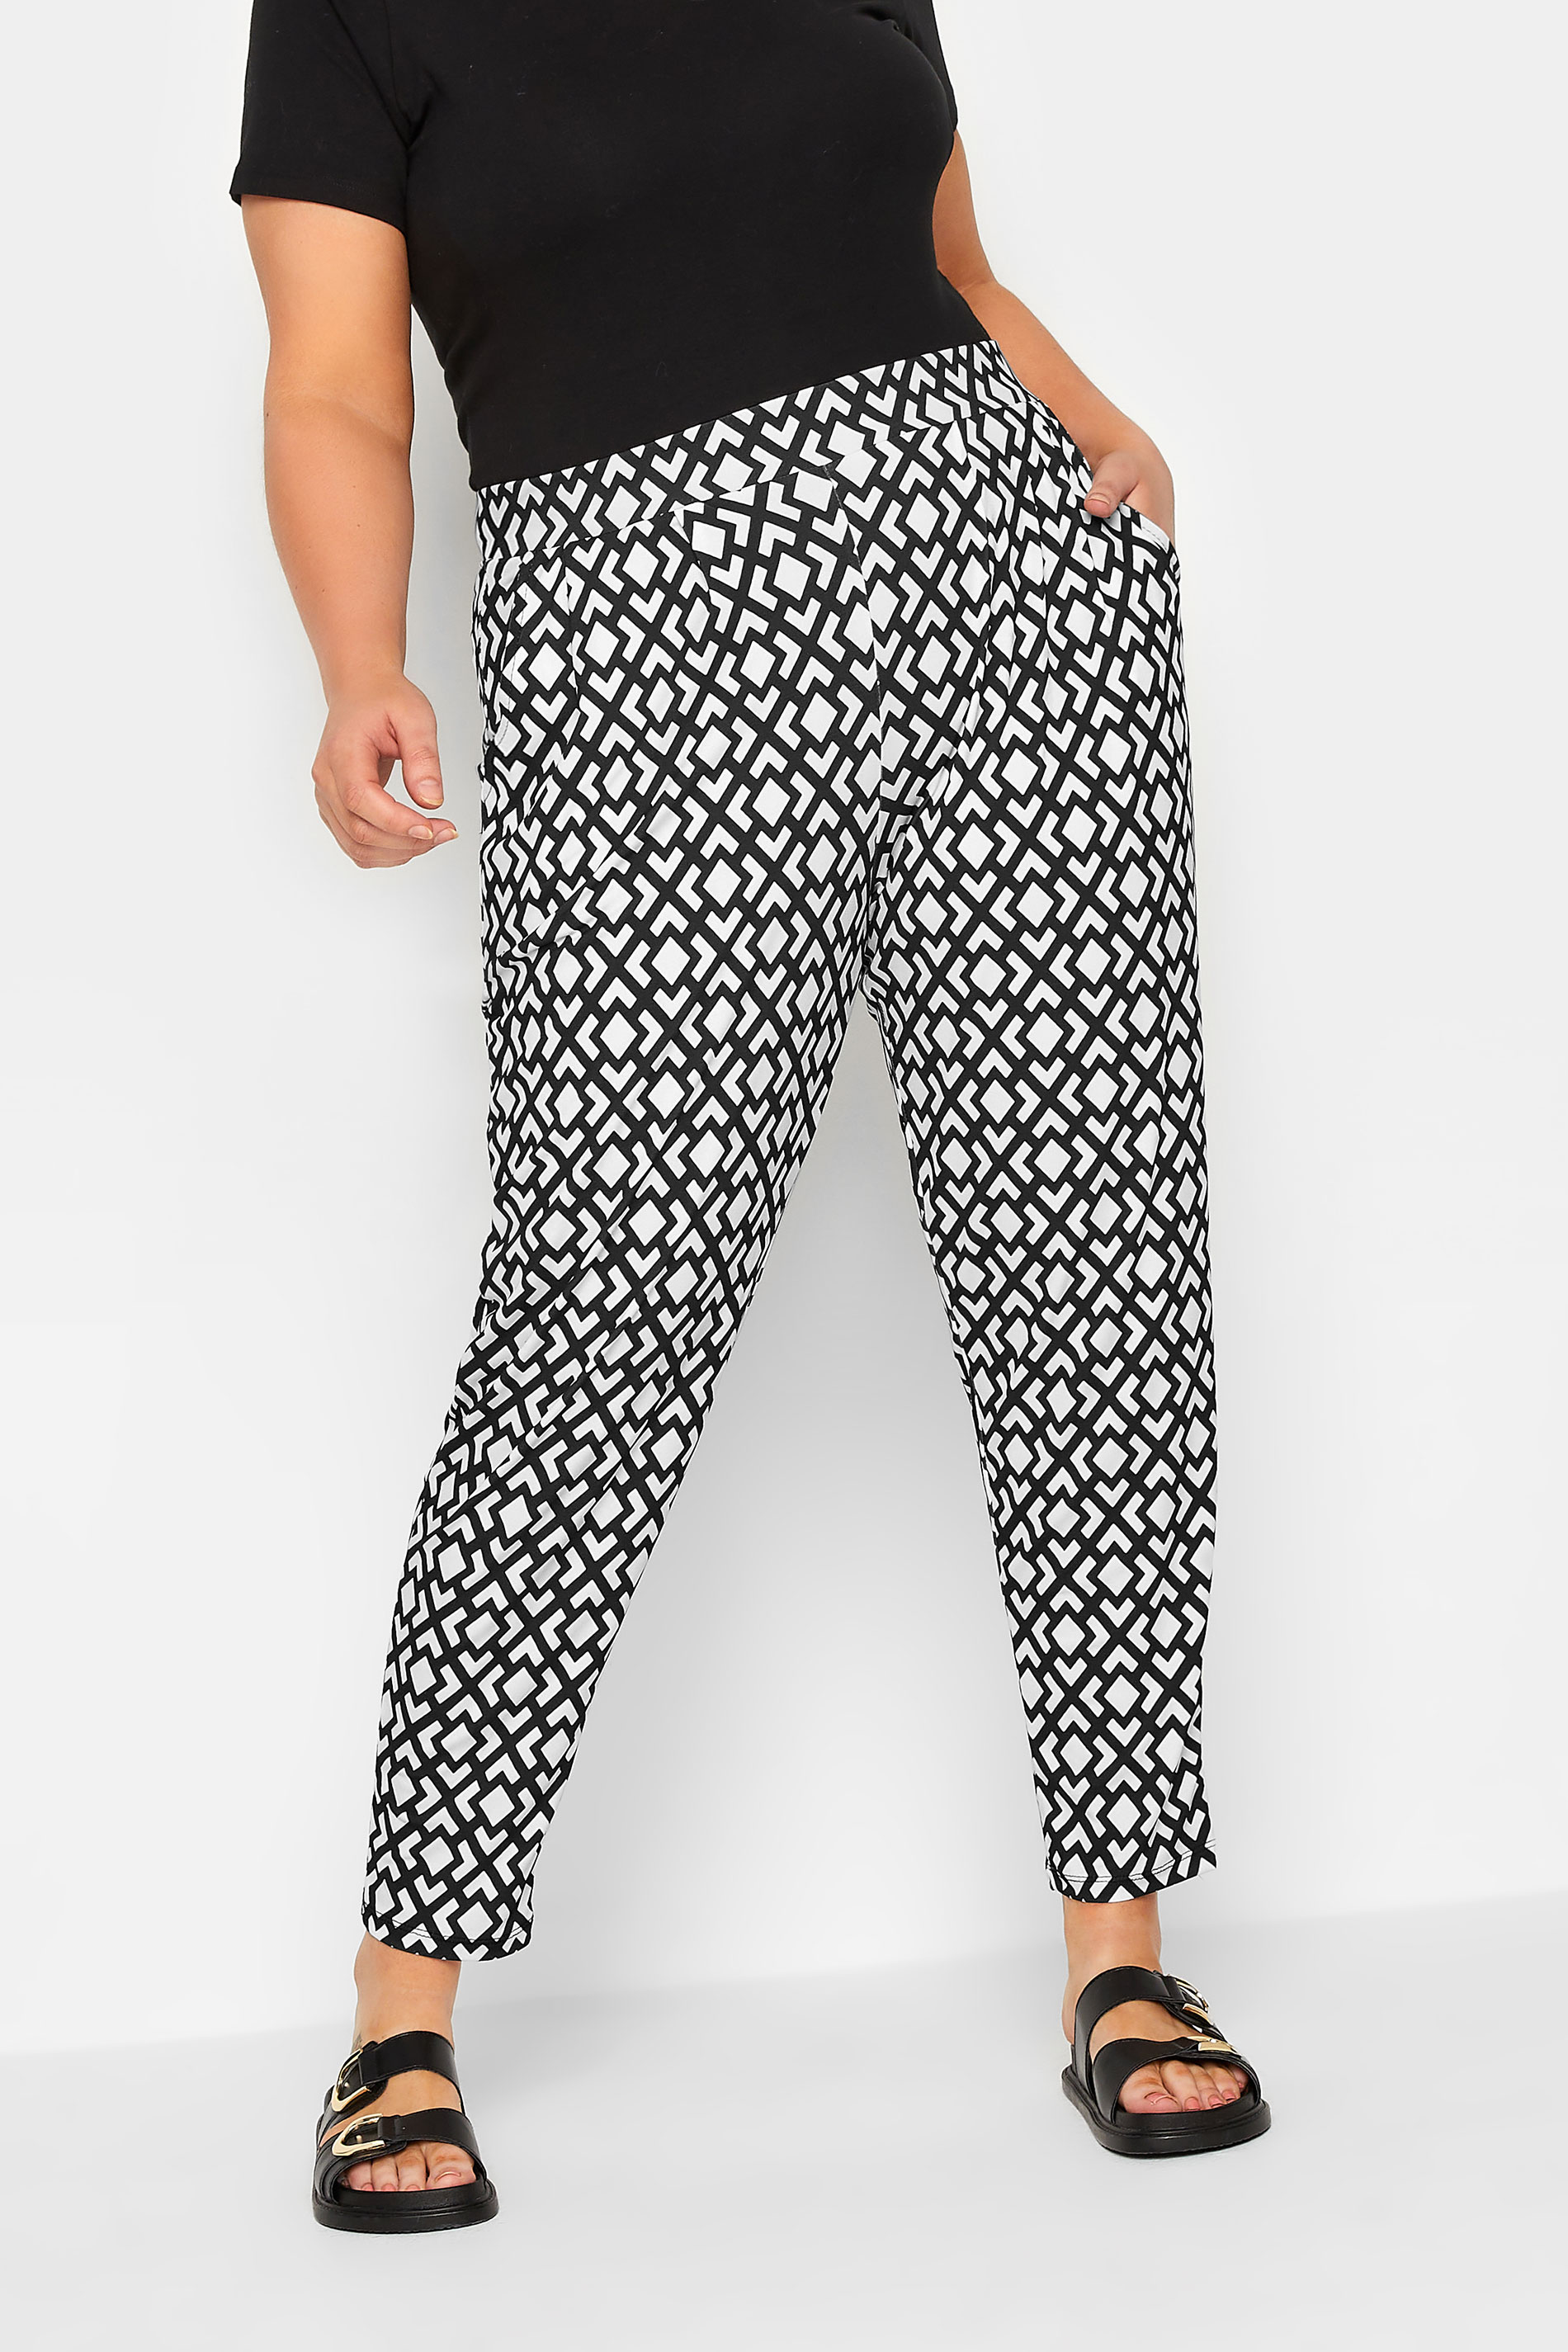 YOURS Curve Monochrome Geometric Print Harem Trouser | Yours Clothing 1